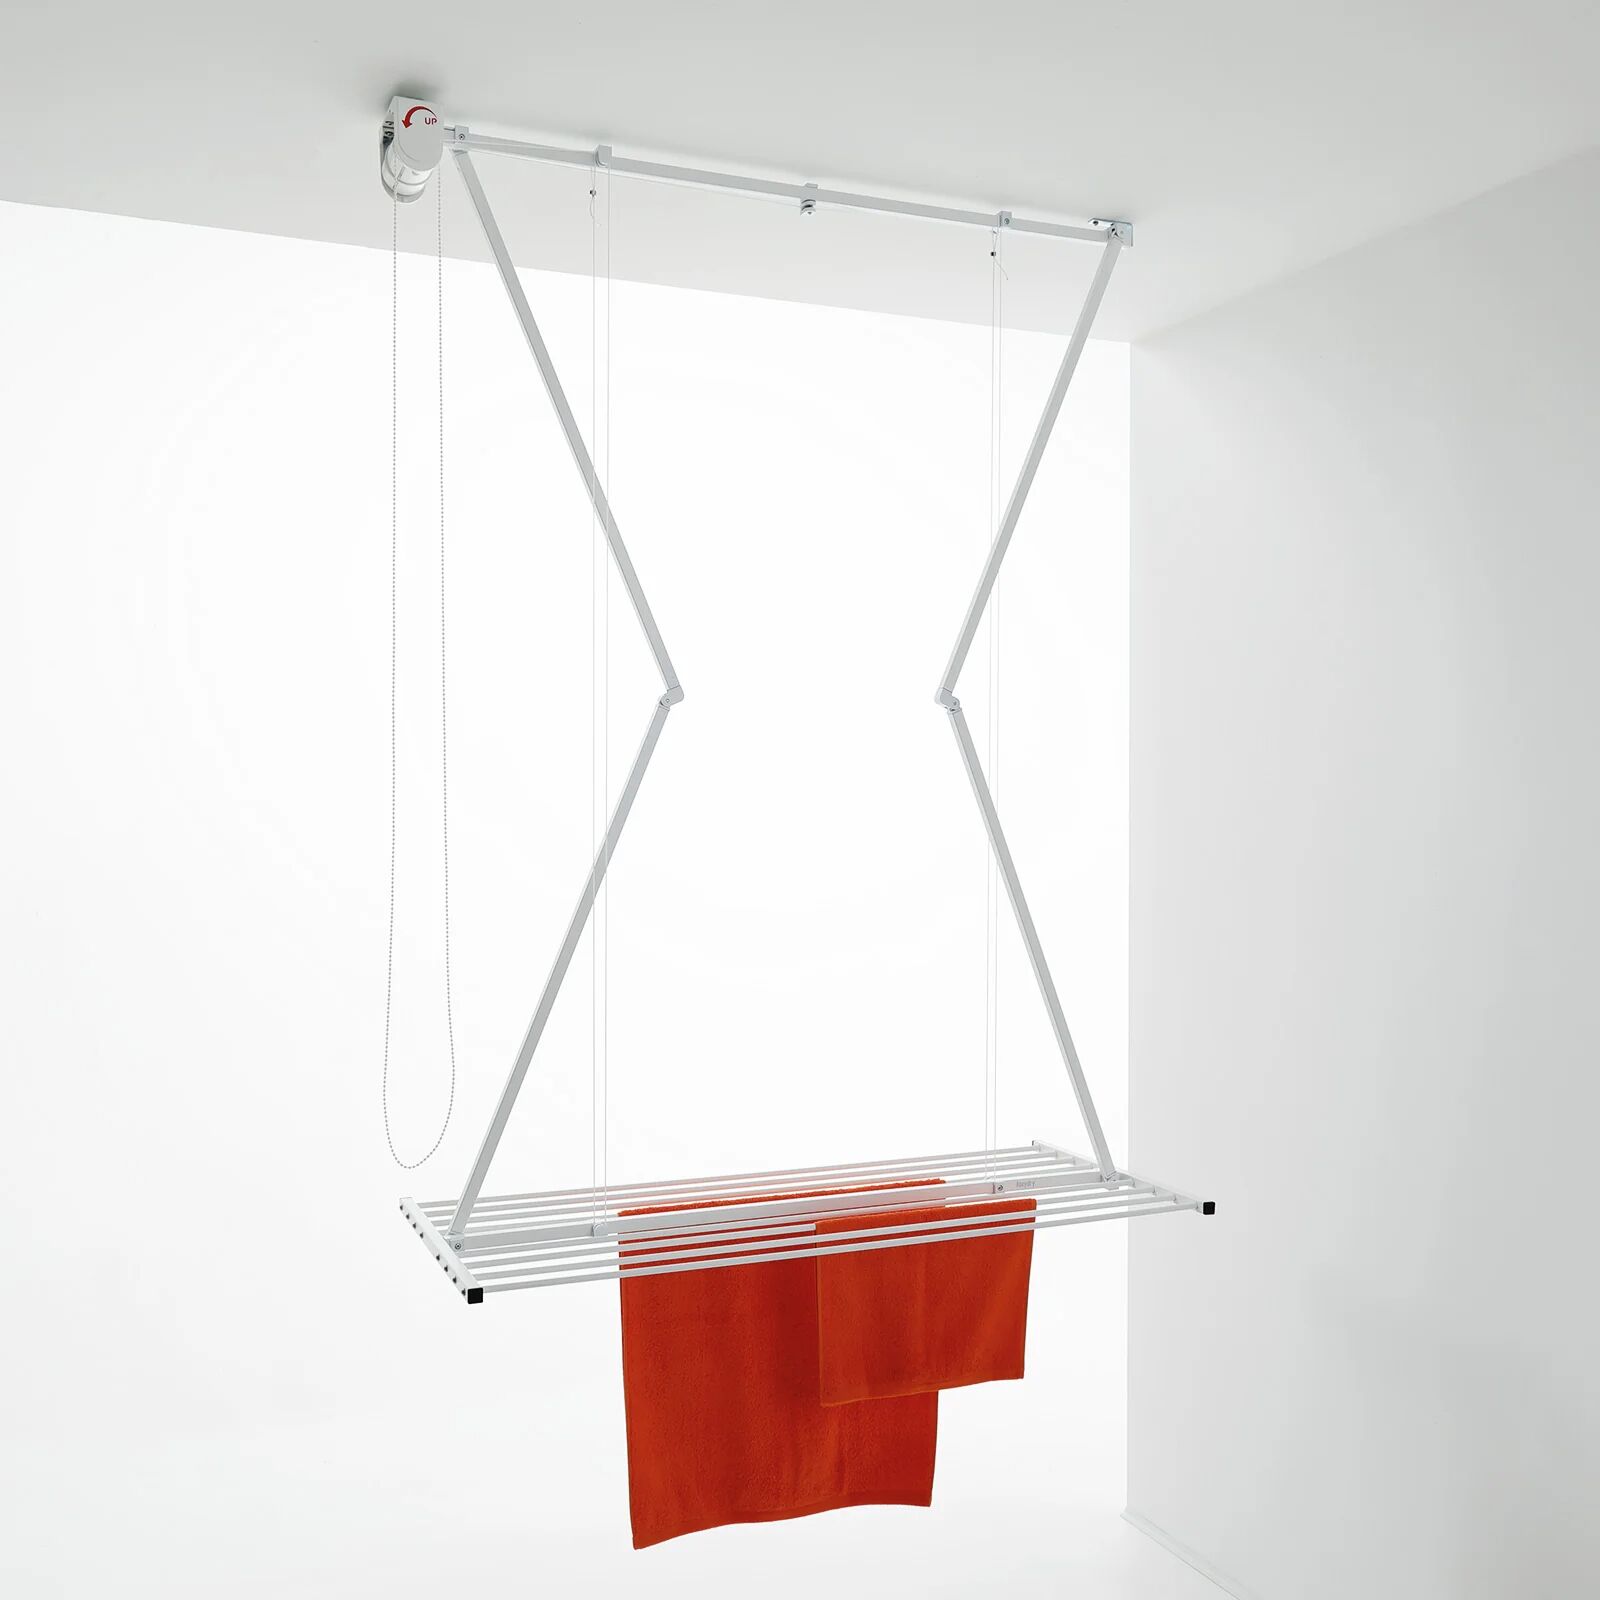 Foxydry Mini White 120 ceiling-mounted drying rack manual clothes